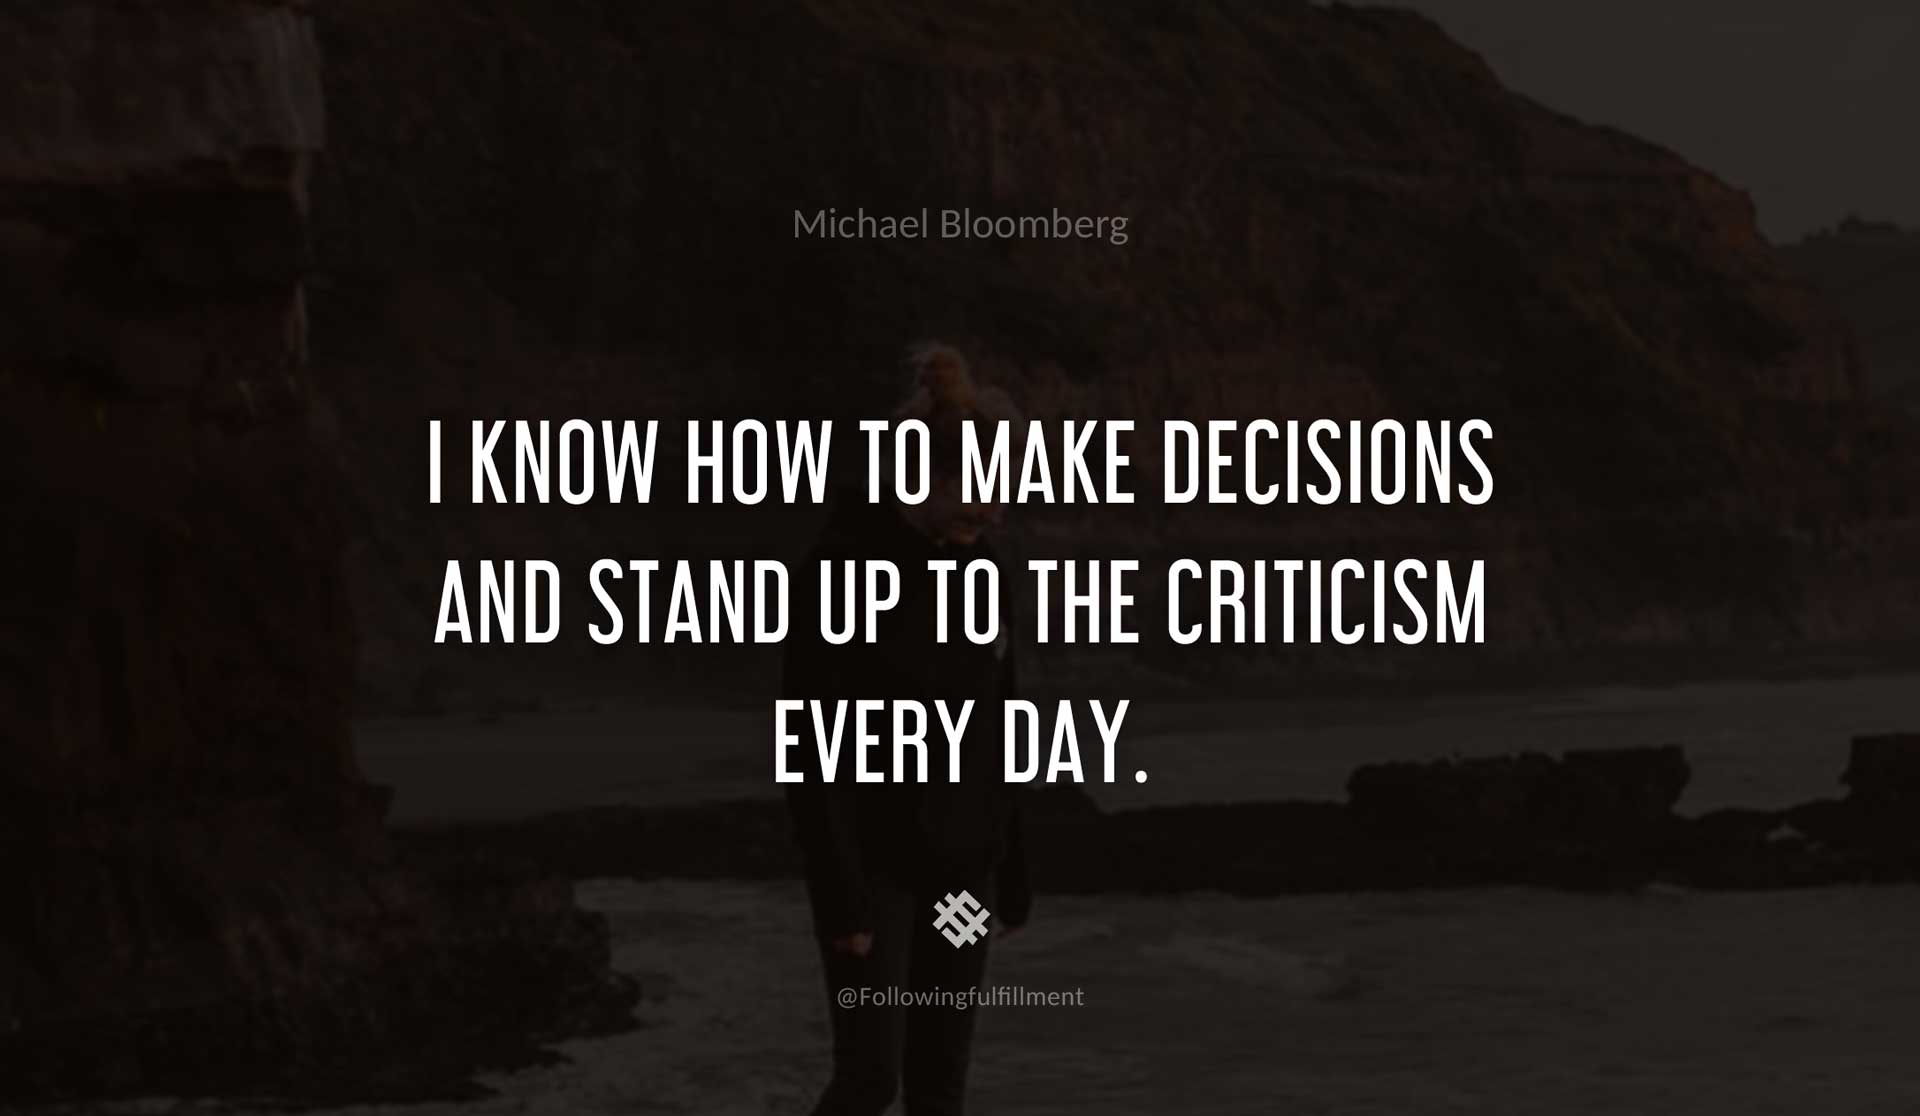 I-know-how-to-make-decisions-and-stand-up-to-the-criticism-every-day.-MICHAEL-BLOOMBERG-Quote.jpg